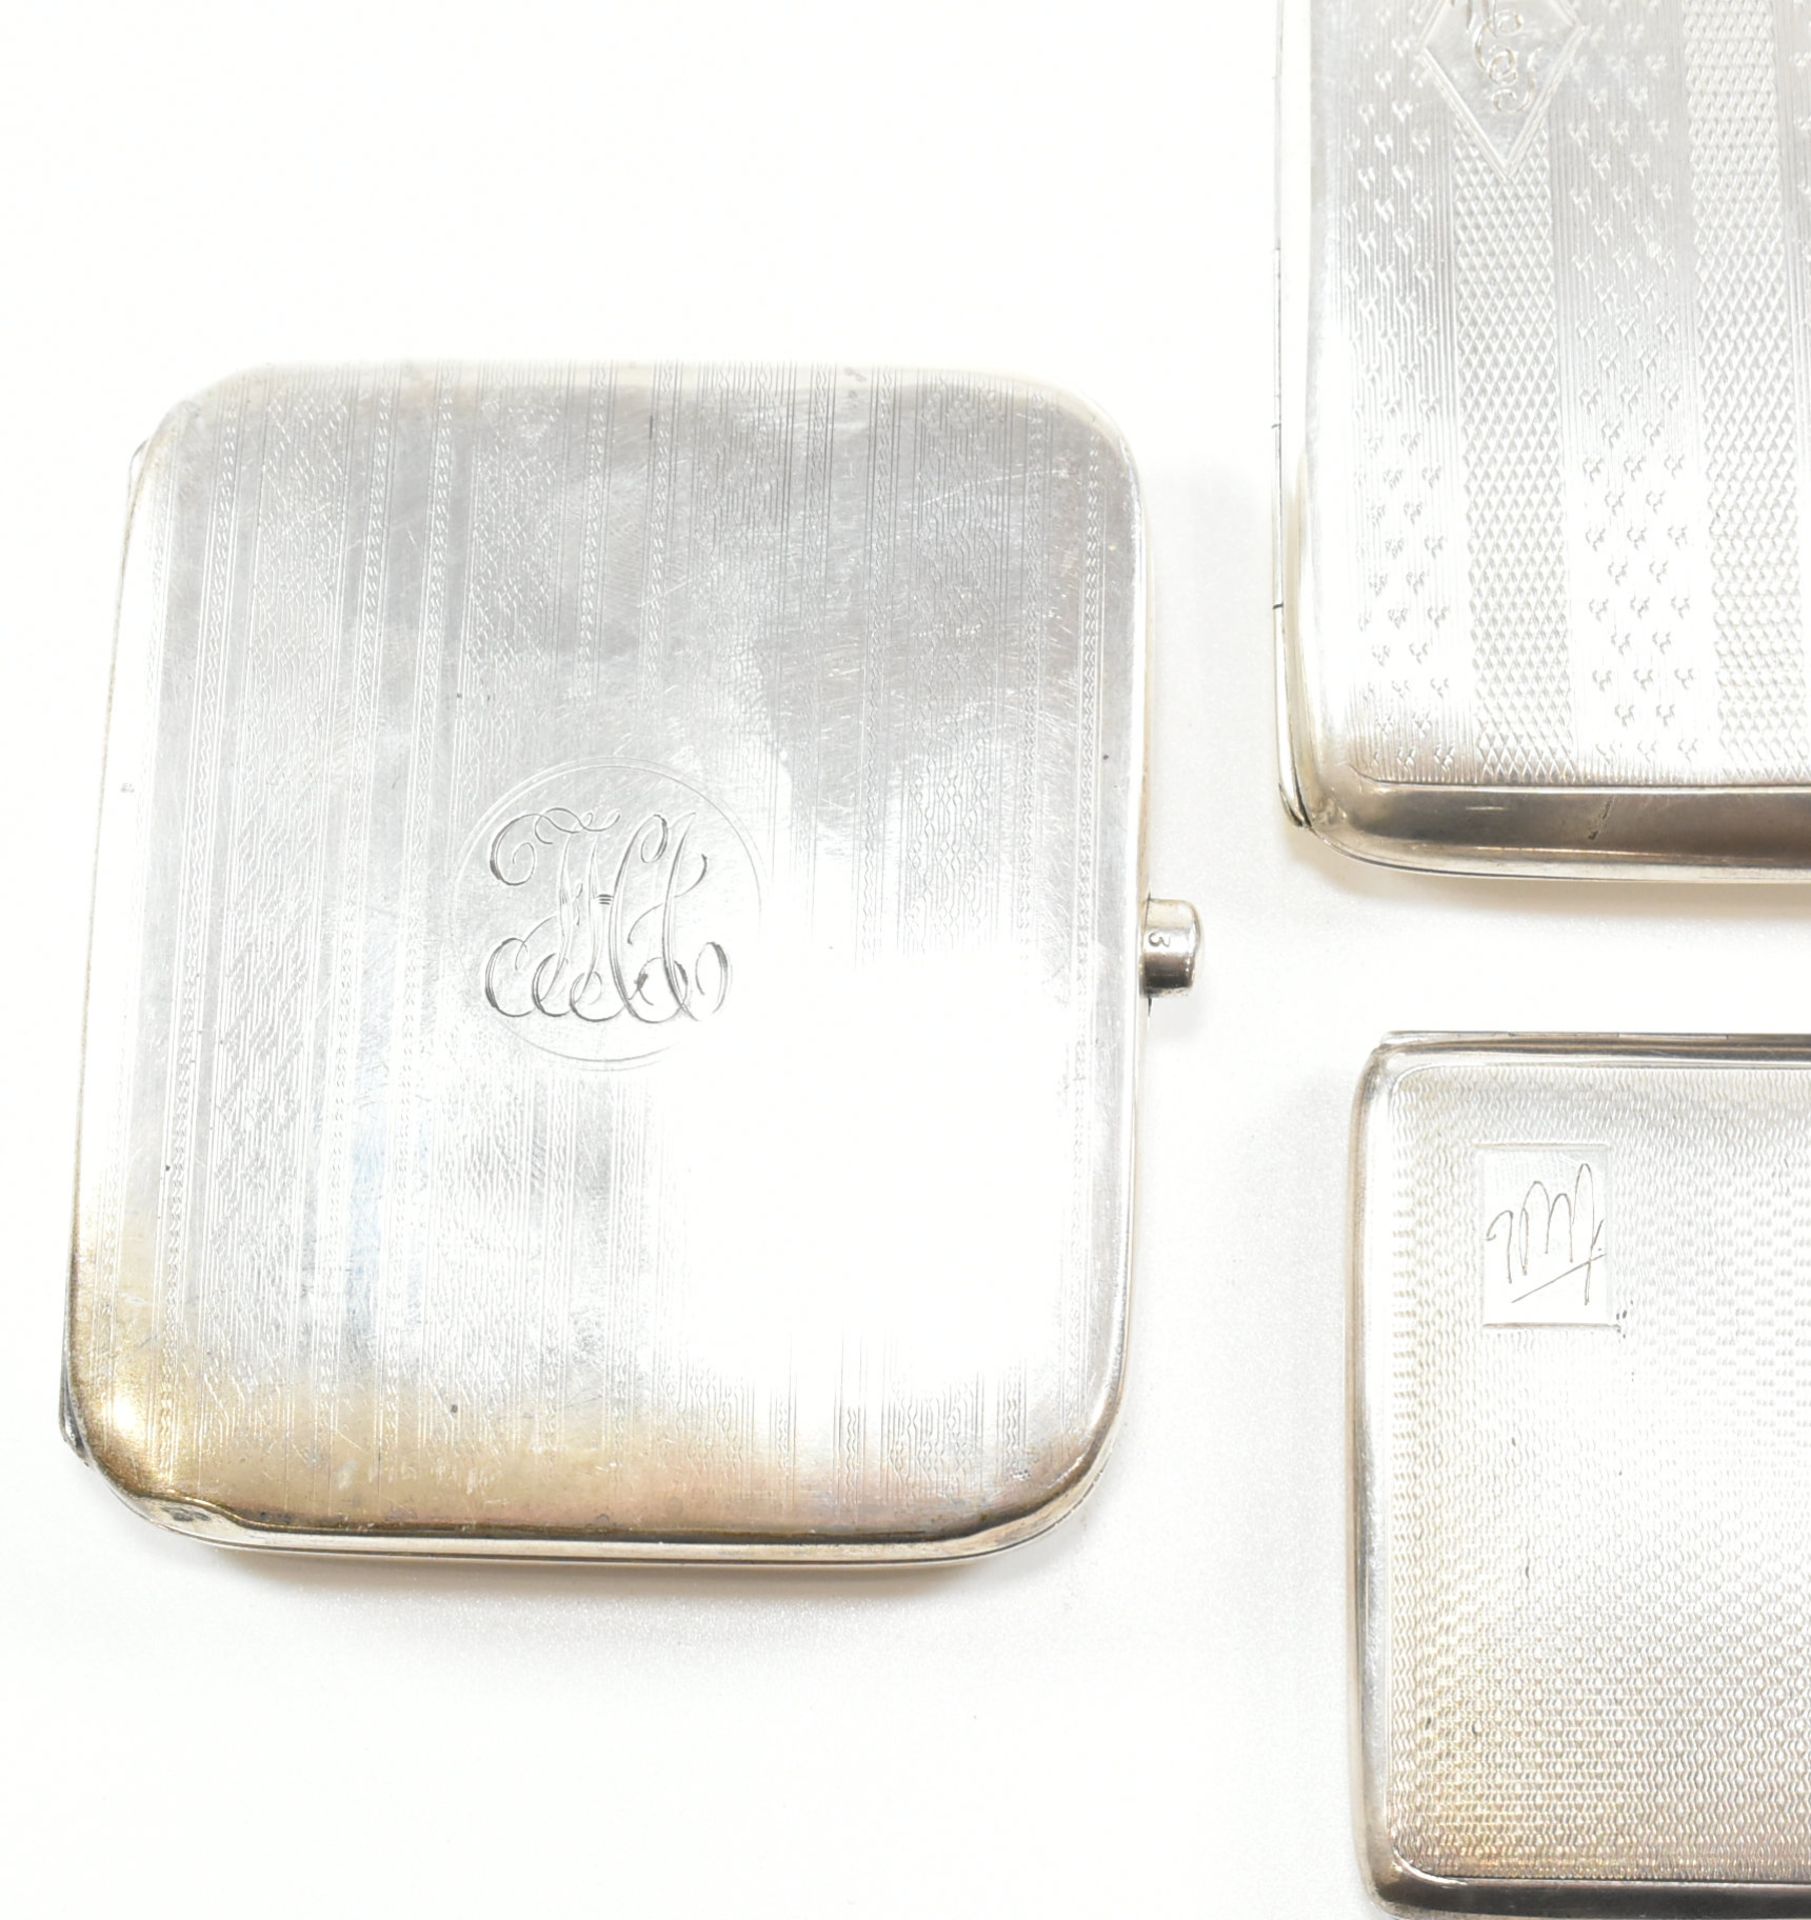 COLLECTION OF EARLY 20TH CENTURY ART DECO HALLMARKED SILVER CIGARETTE & VESTA CASE - Image 2 of 14